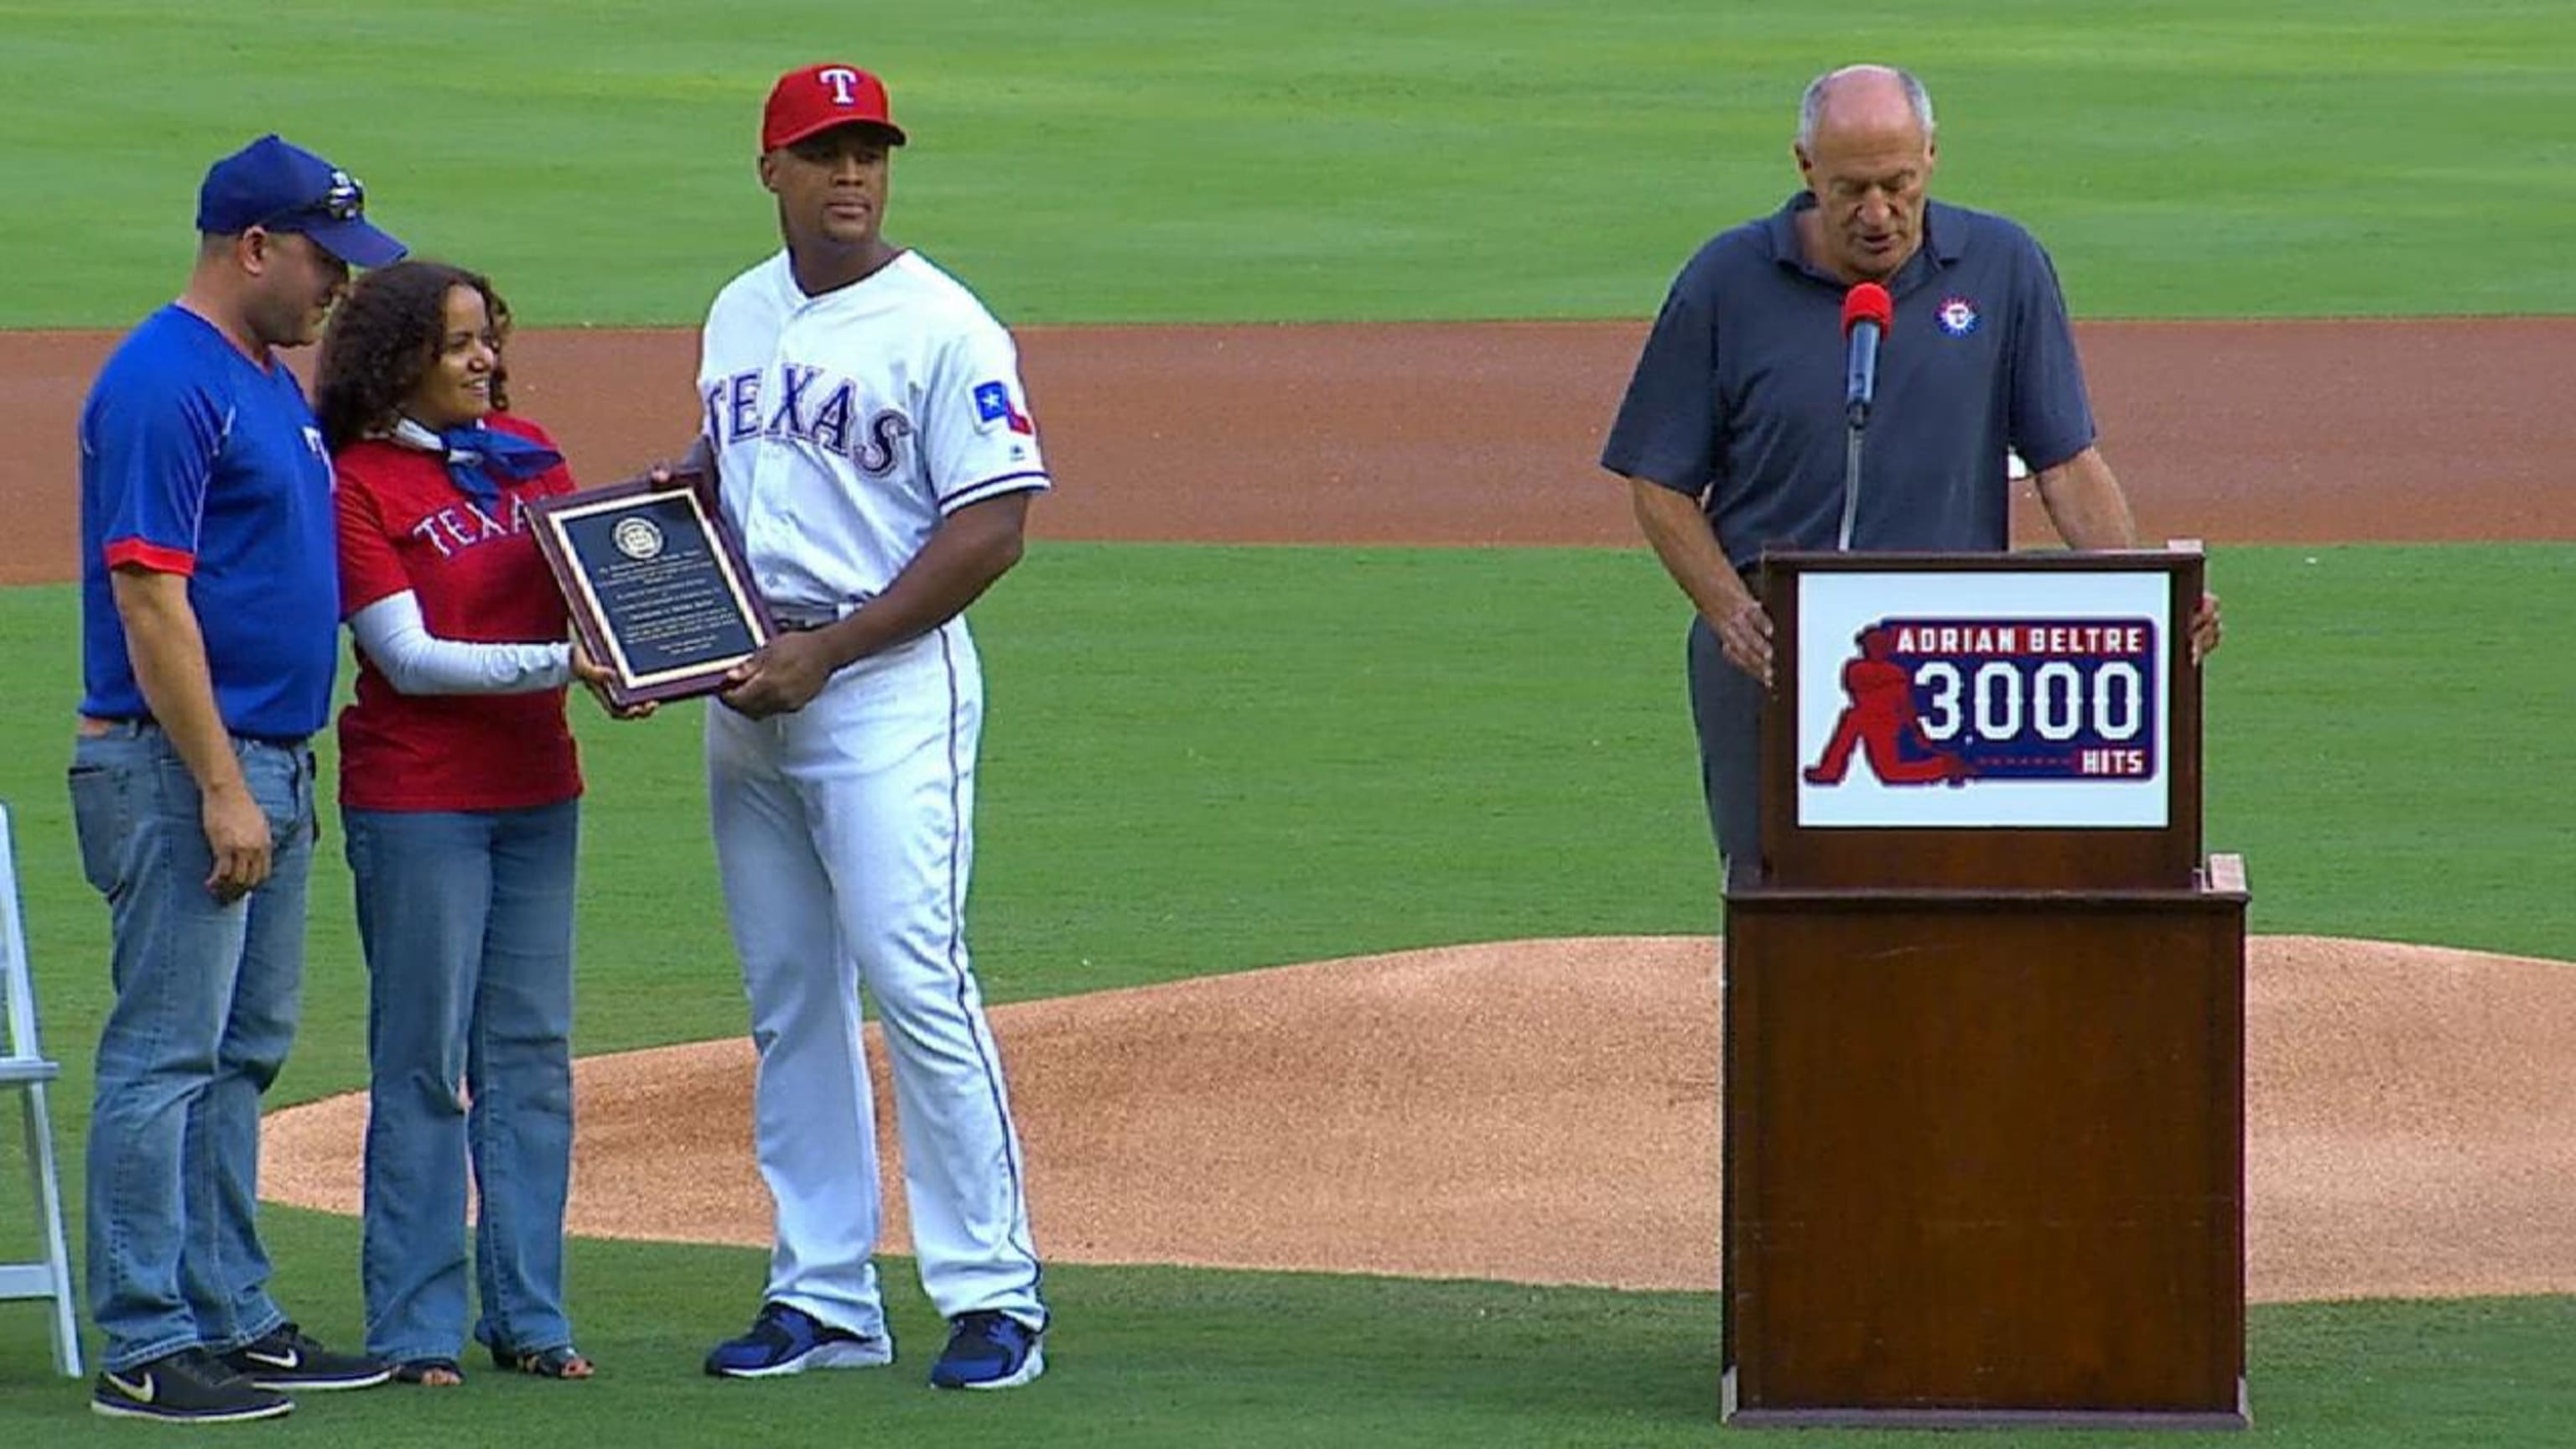 Texas Rangers' Adrian Beltre doubles for 3,000th hit; 31st player